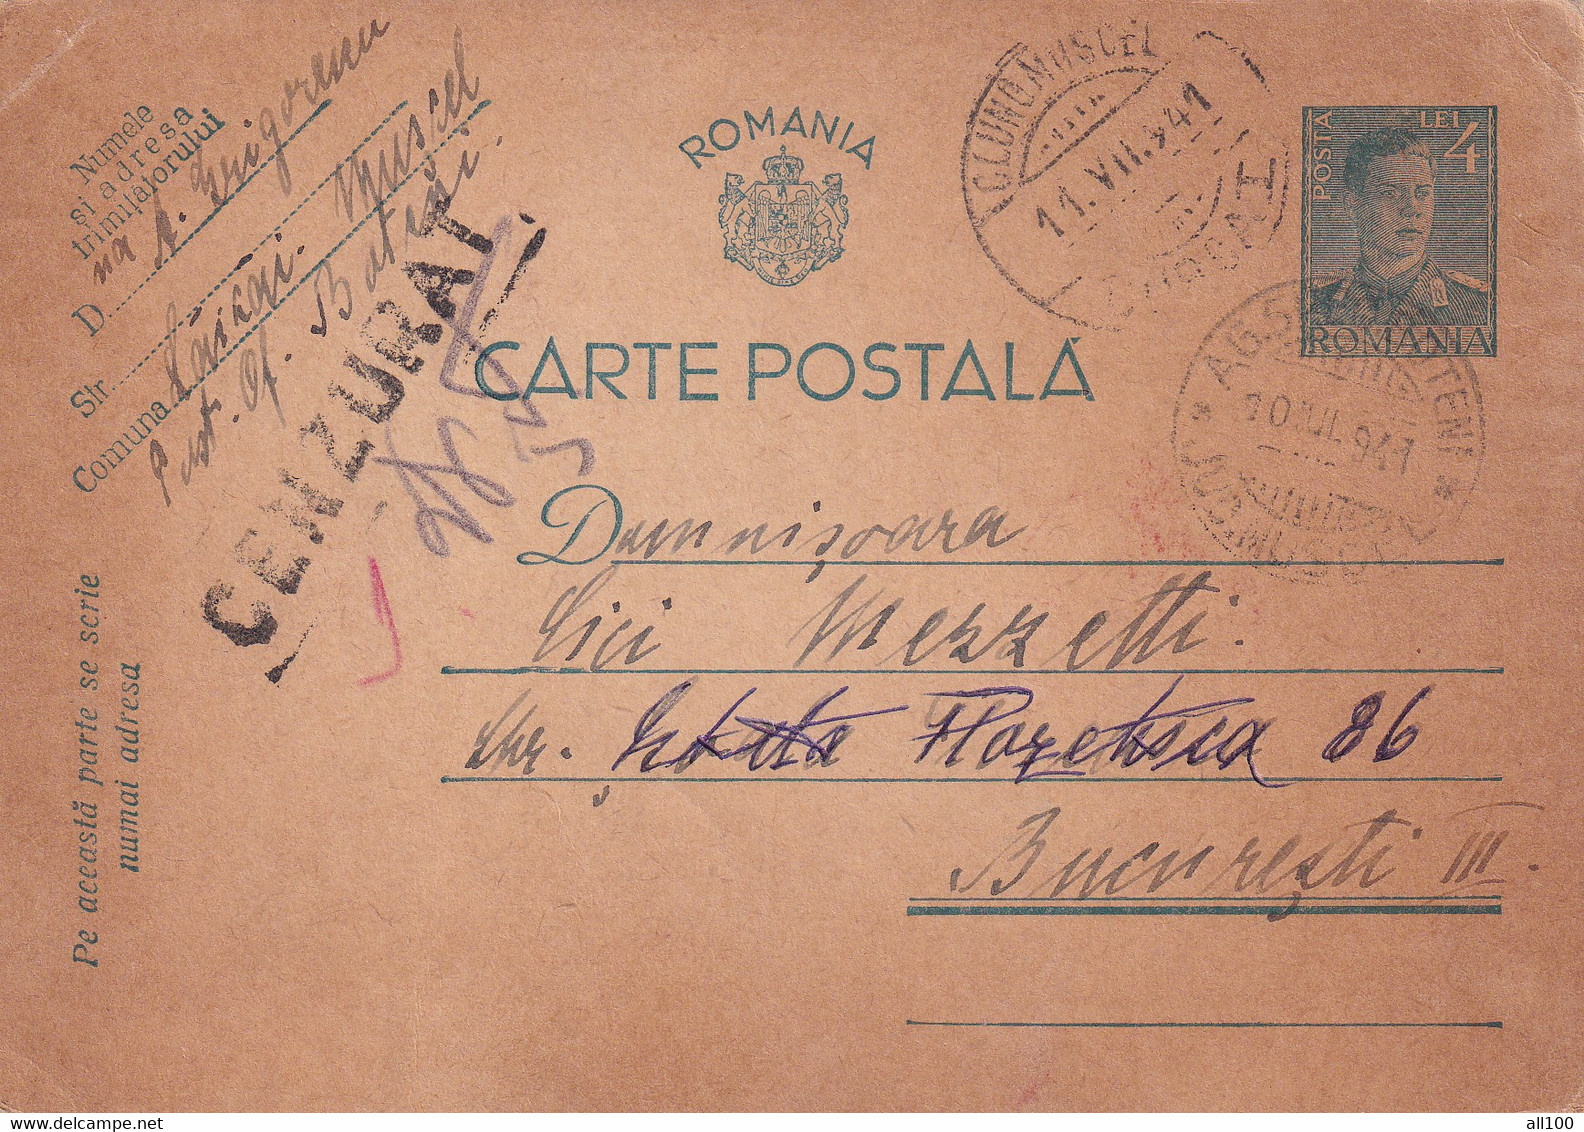 A16460 - MILITARY LETTER  POSTAL STATIONERY CENZORED CAMPULUNG MUSCEL  KING MICHAEL 4 LEI 1941 - 2. Weltkrieg (Briefe)